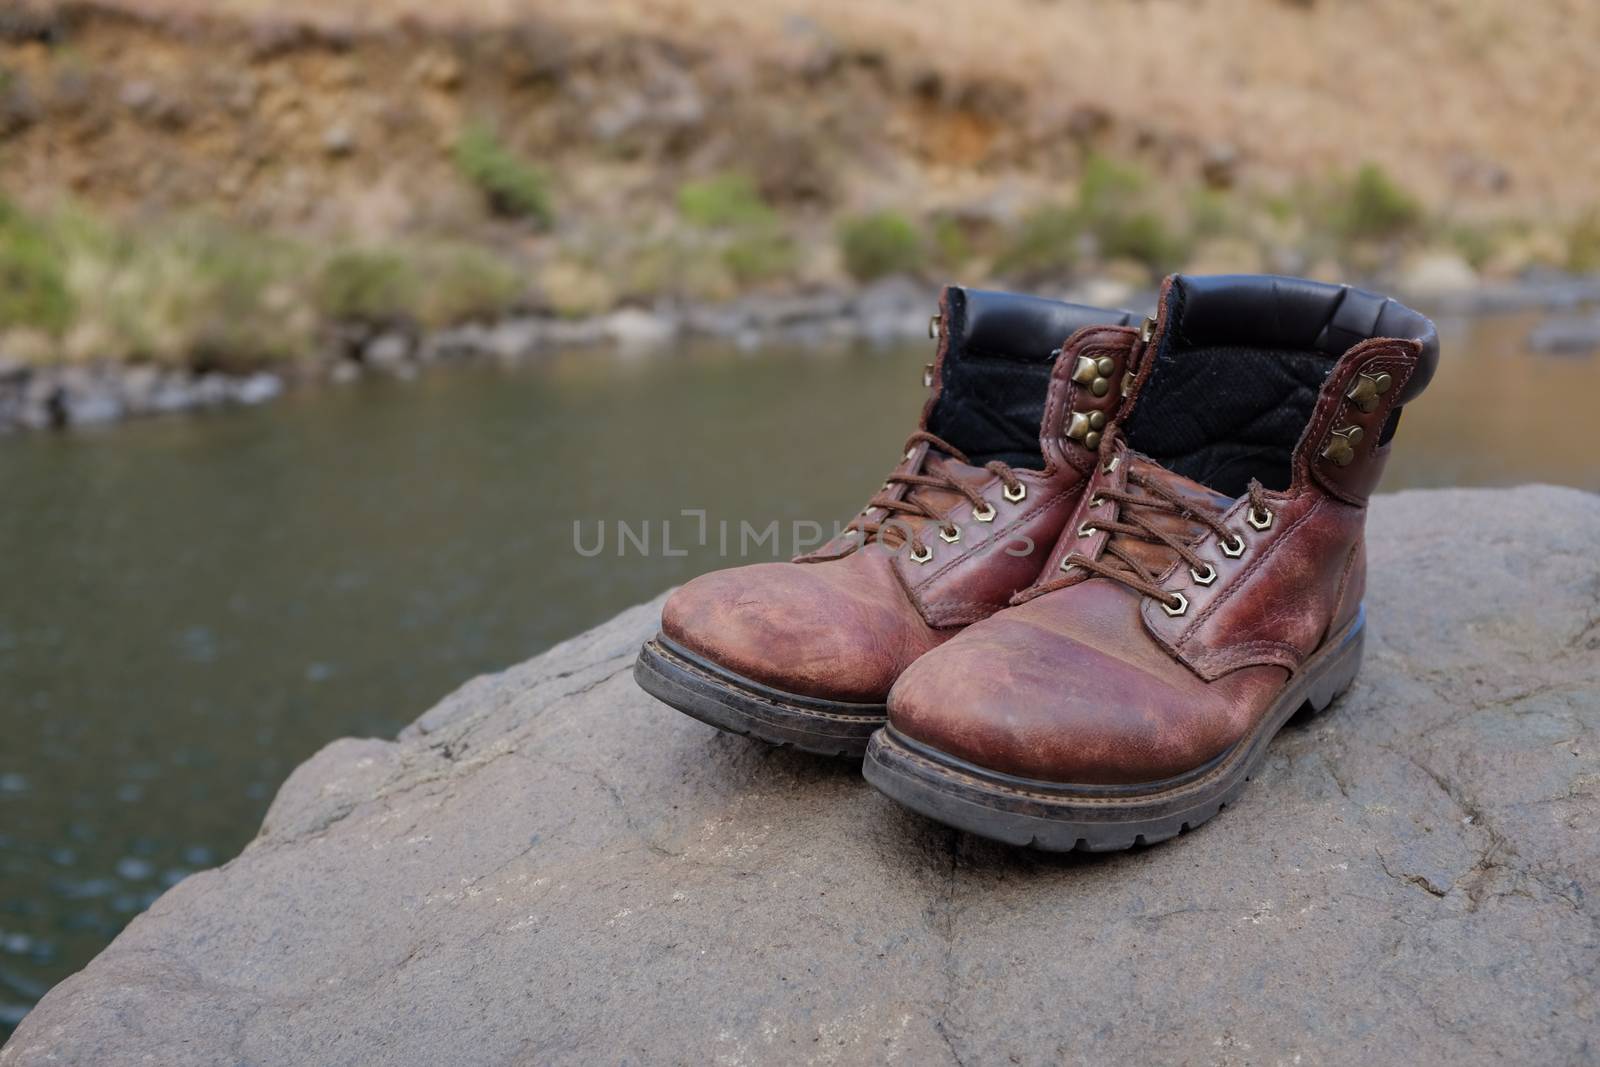 Old hiking boots beside river by alistaircotton